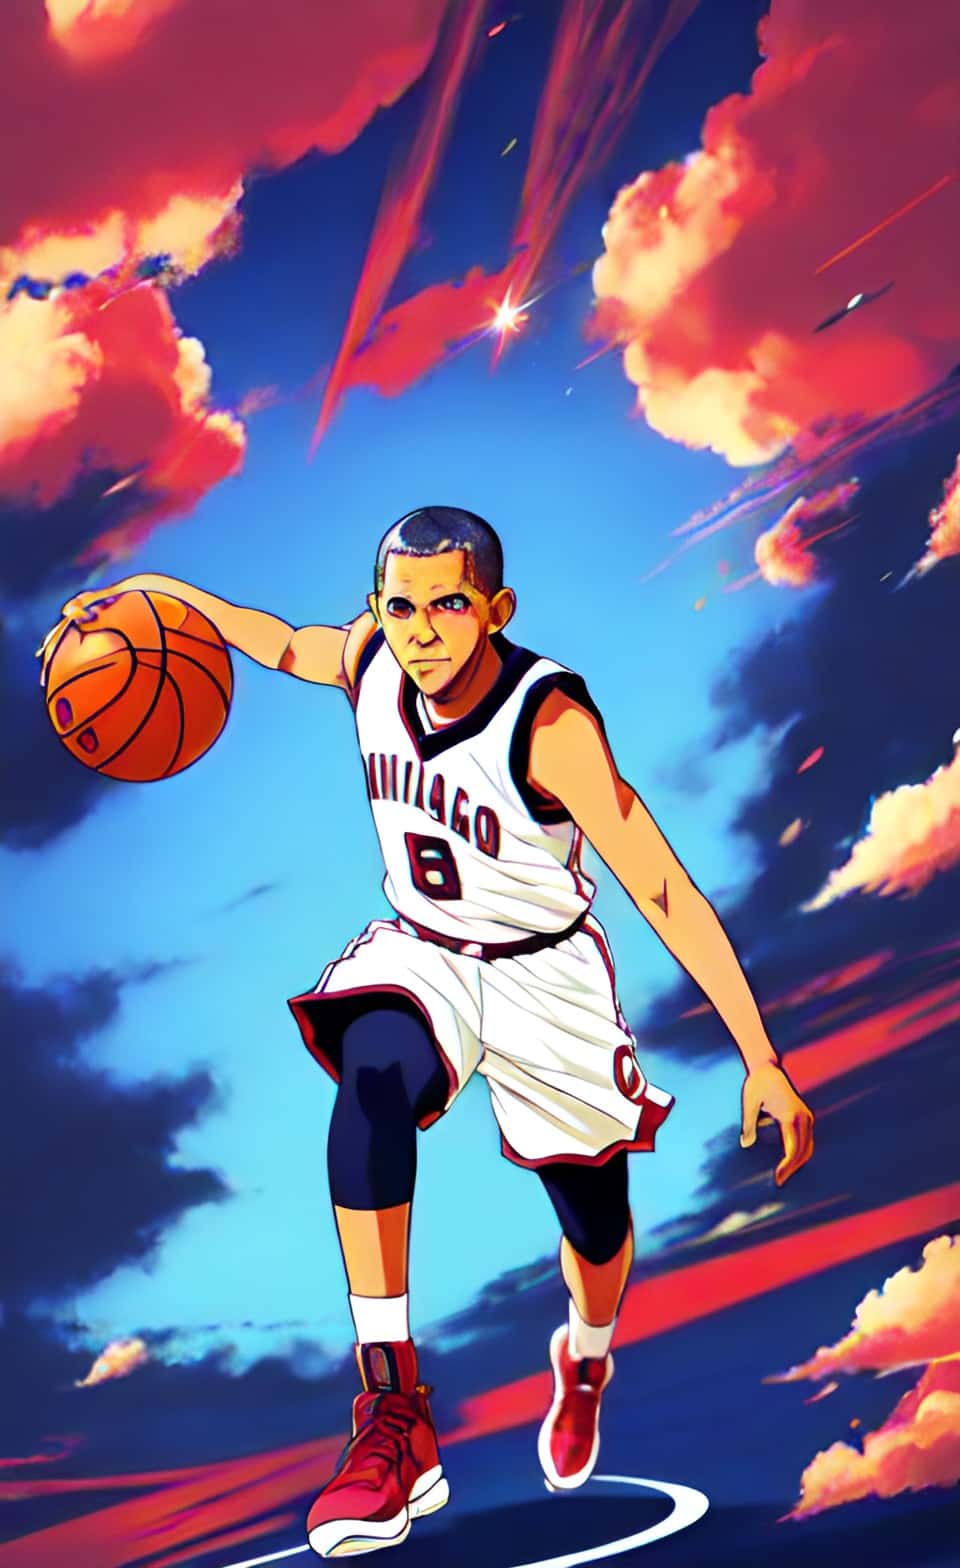 Barack Obama playing basketball in an anime style